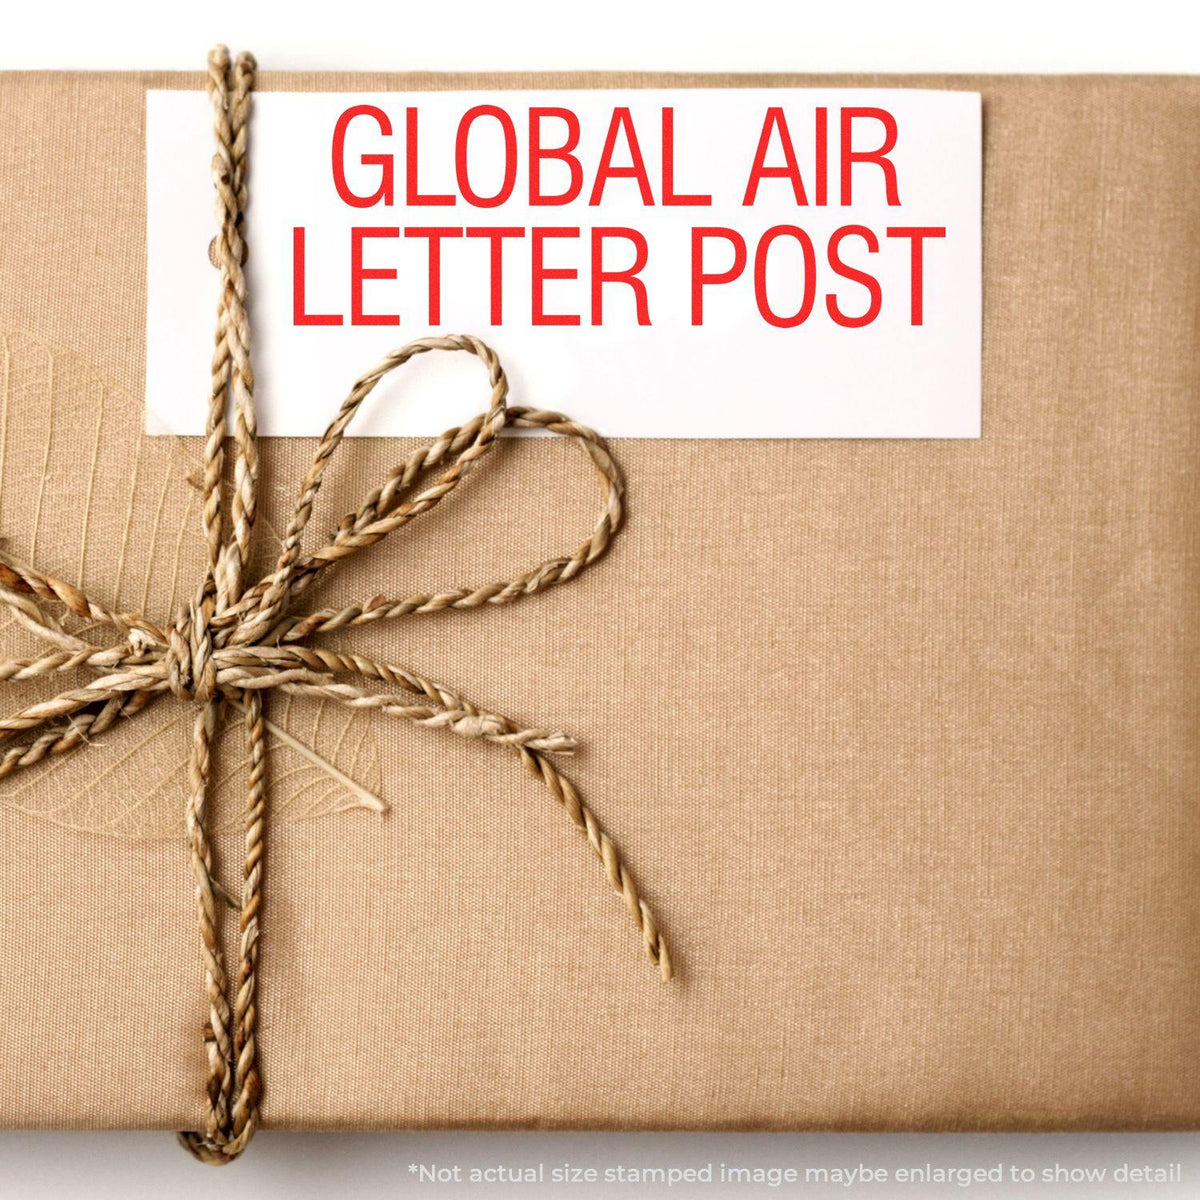 In Use Global Air Letter Post Rubber Stamp Image